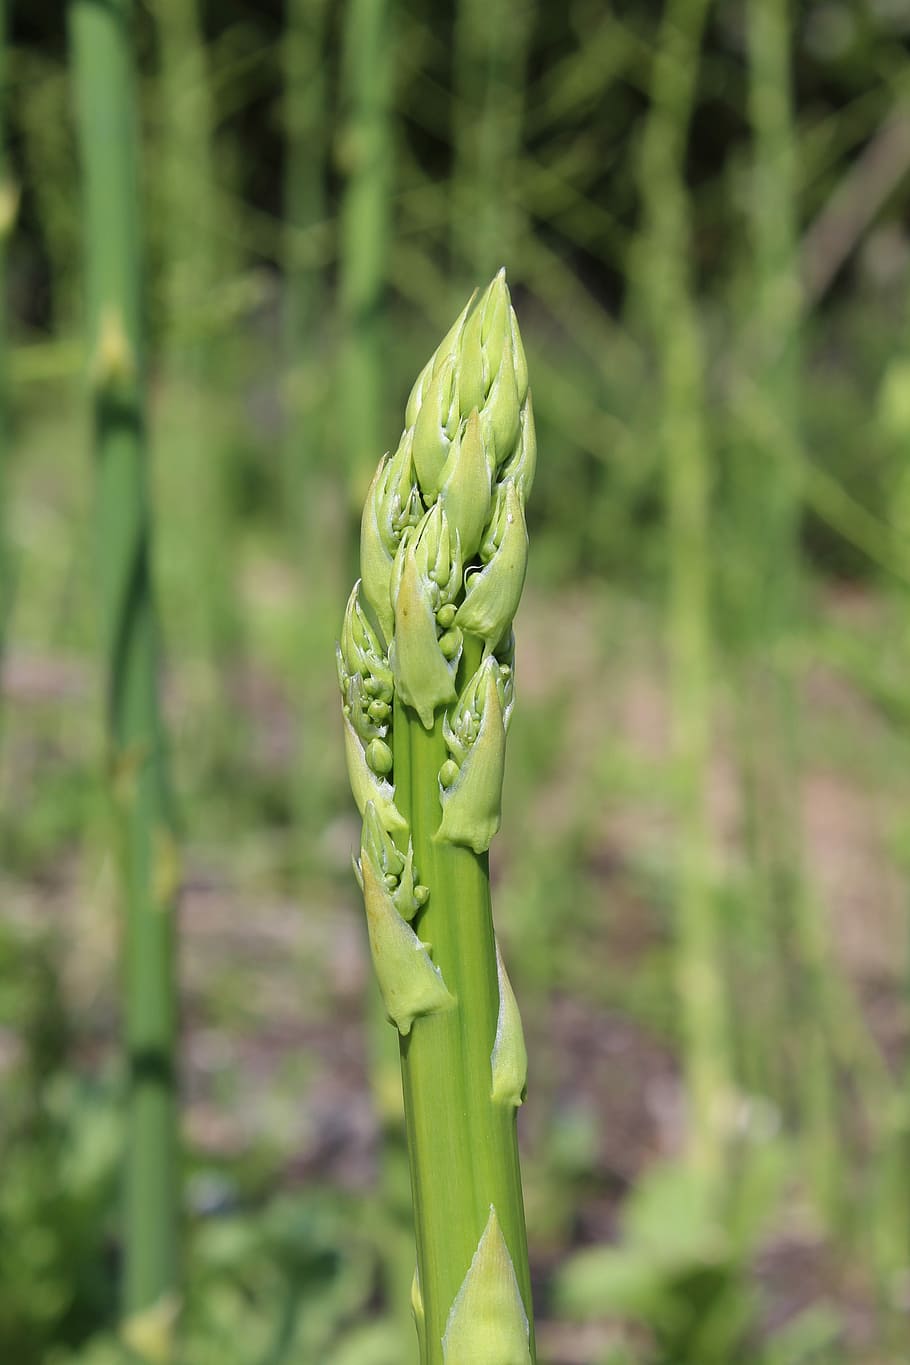 asparagus, aspargeshoved, Asparagus, aspargeshoved, green asparagus, green color, growth, vegetable, day, agriculture, plant